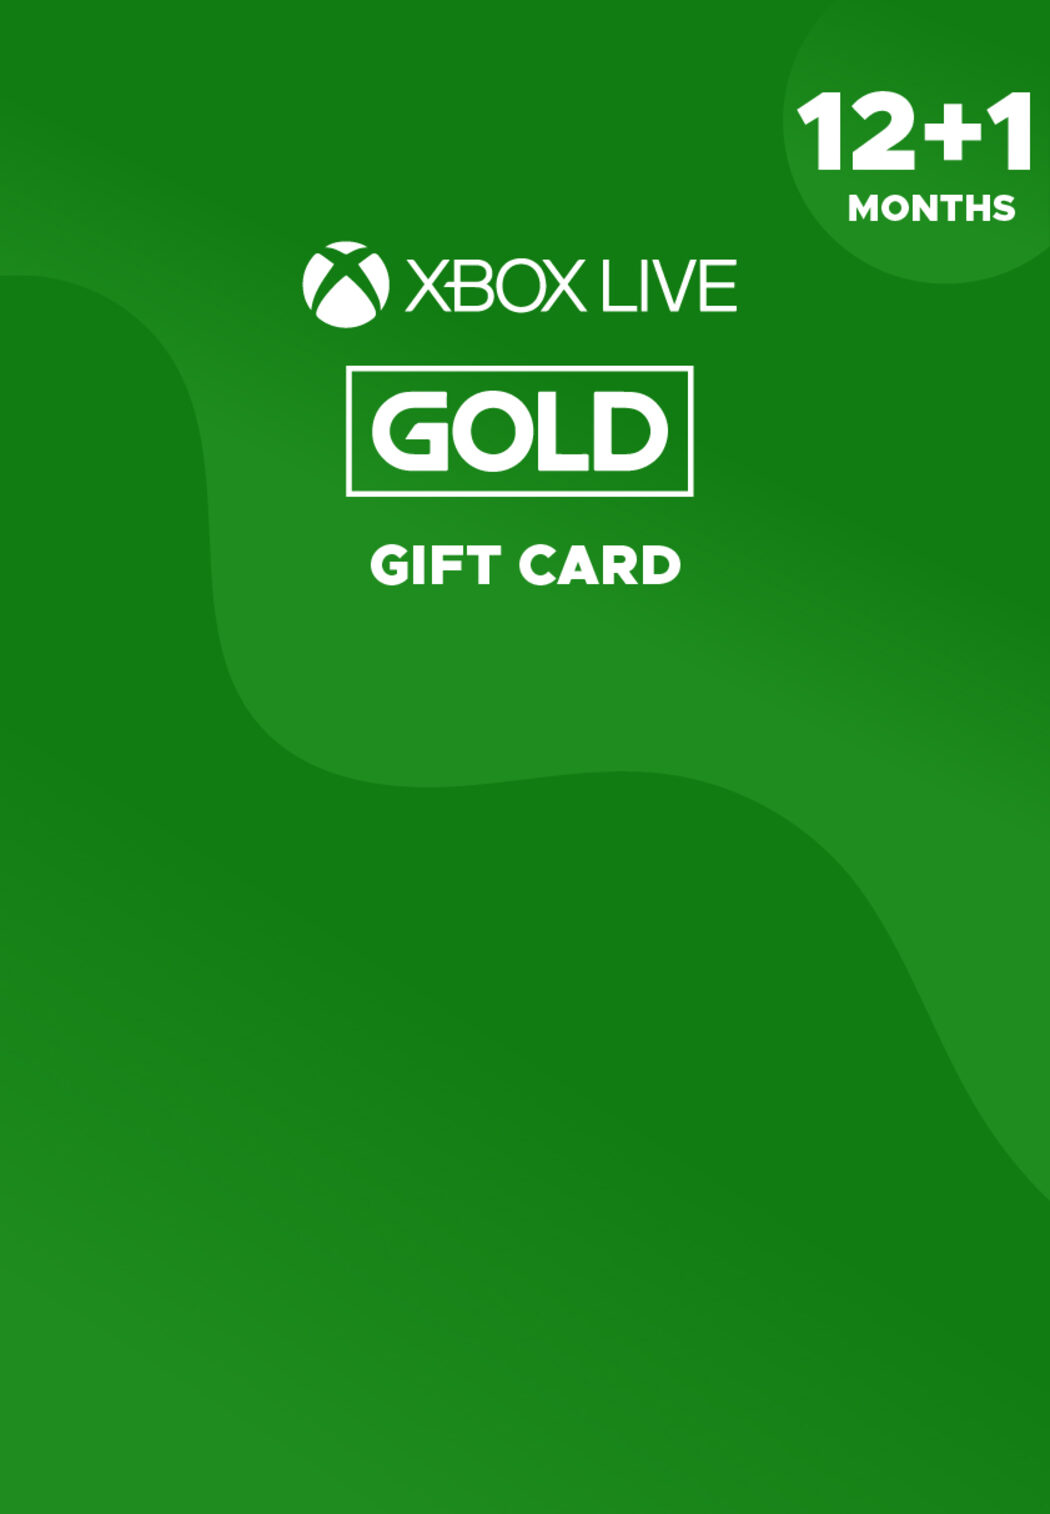 xbox gold live 6 months